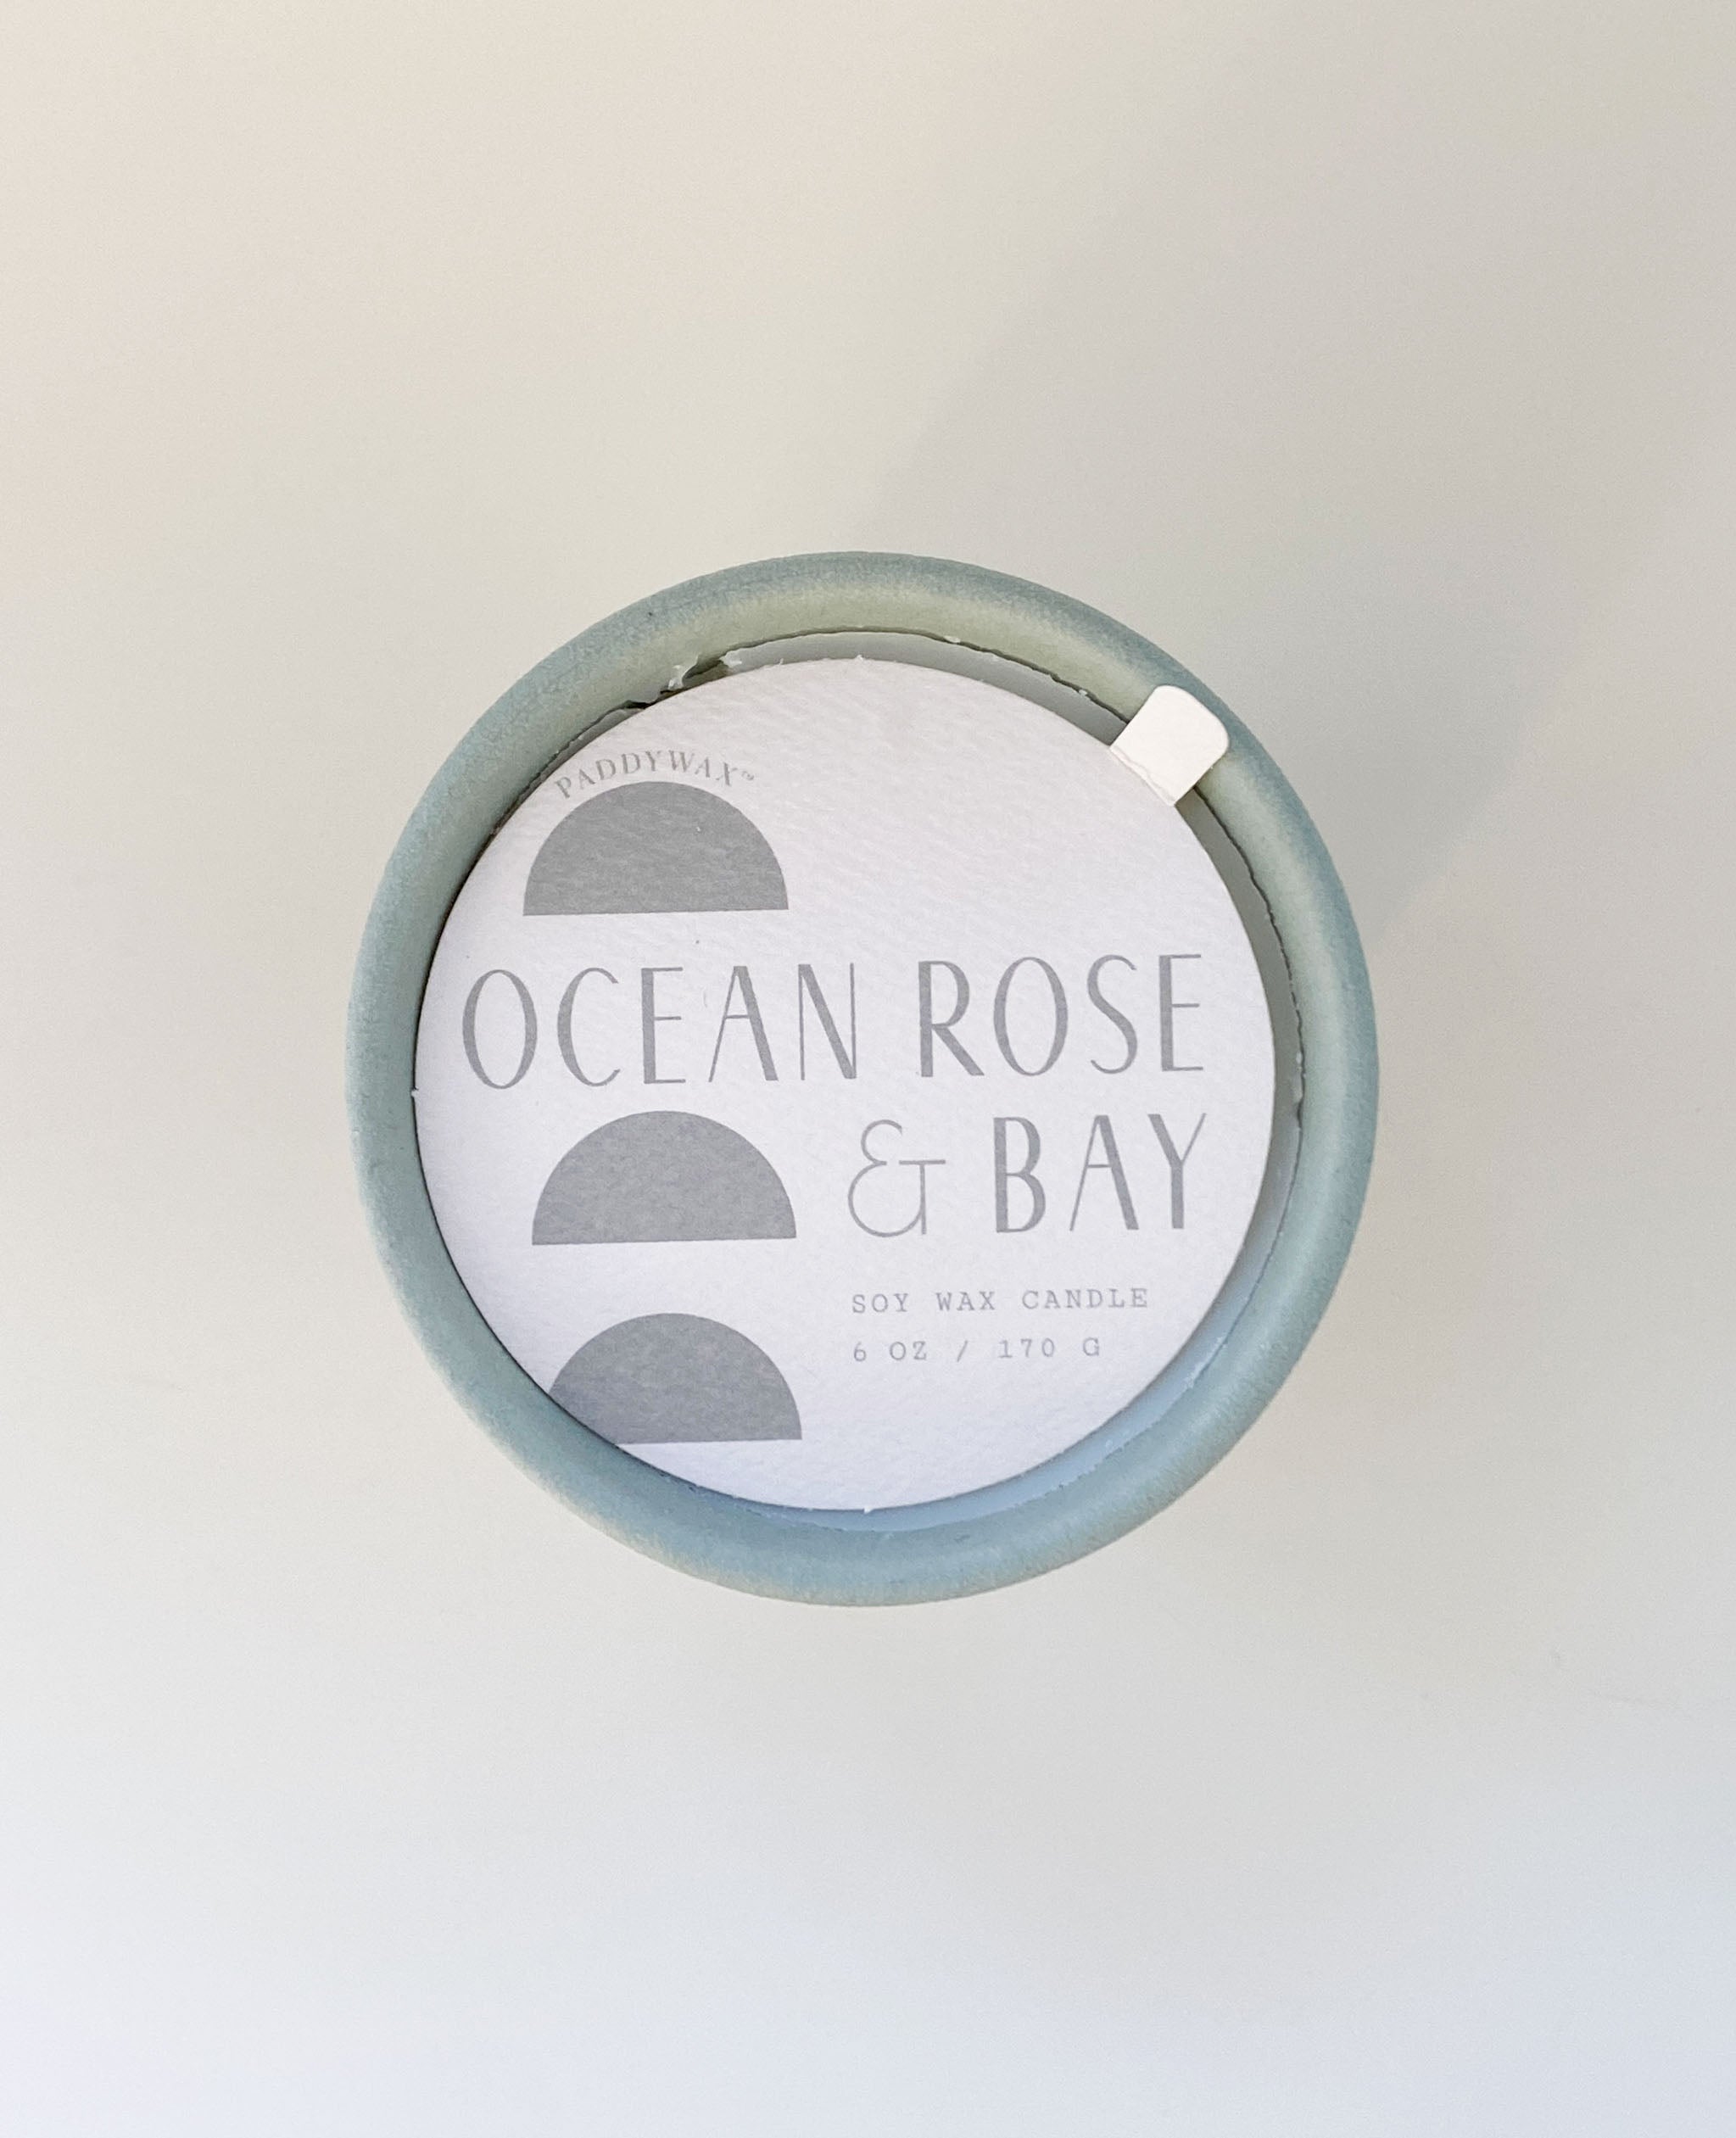 Hourglass Candle - Ocean Rose & Bay